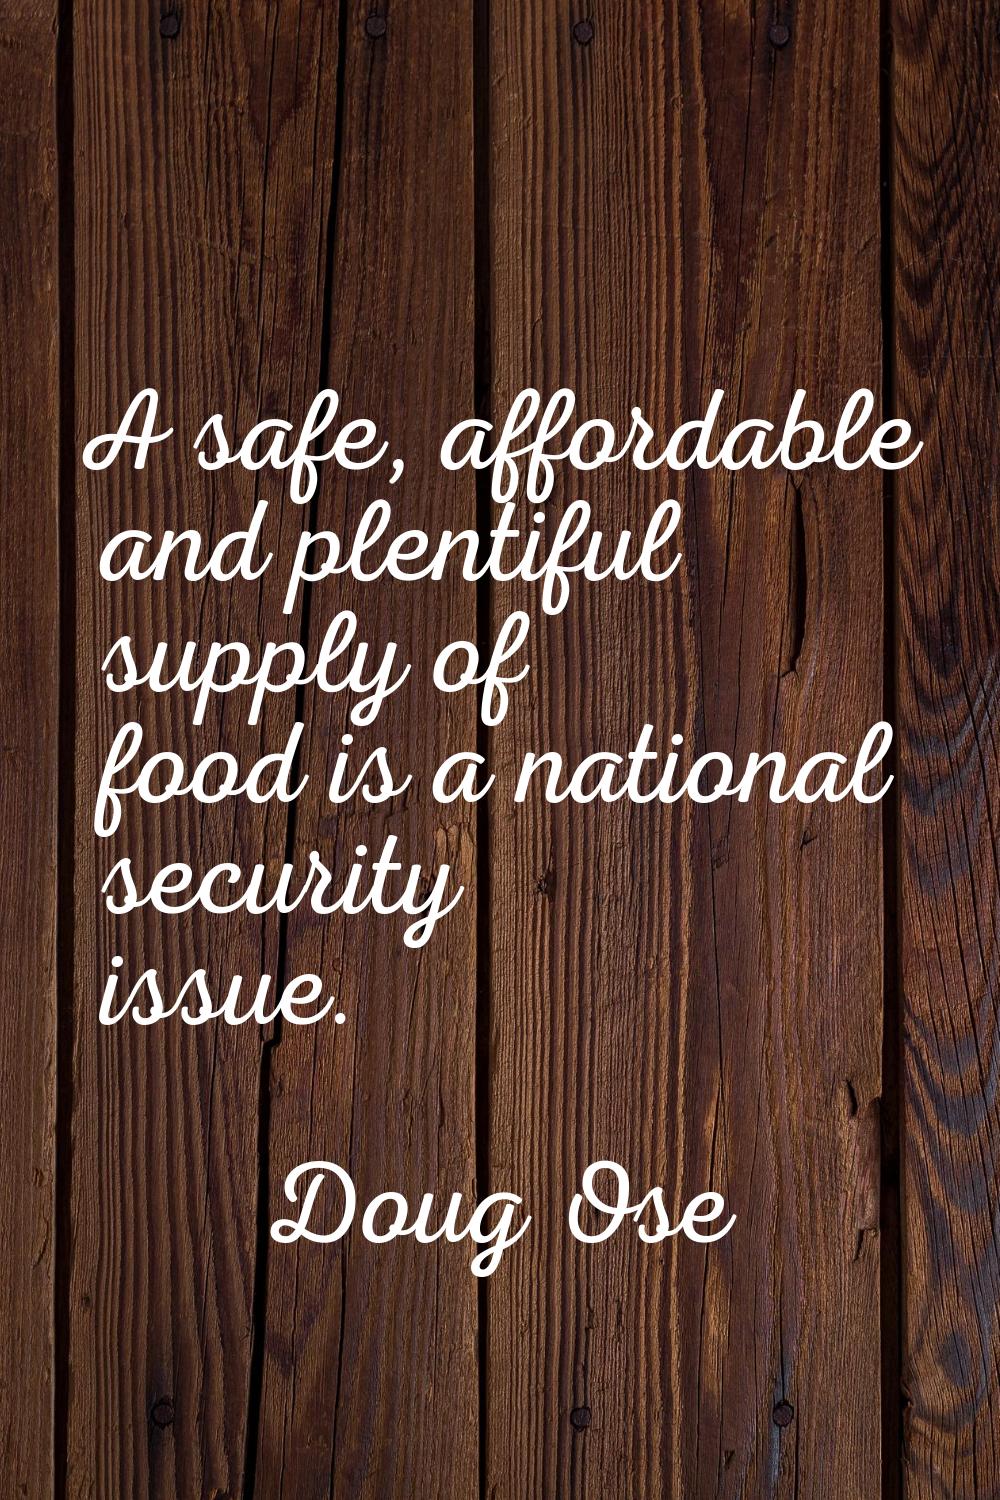 A safe, affordable and plentiful supply of food is a national security issue.